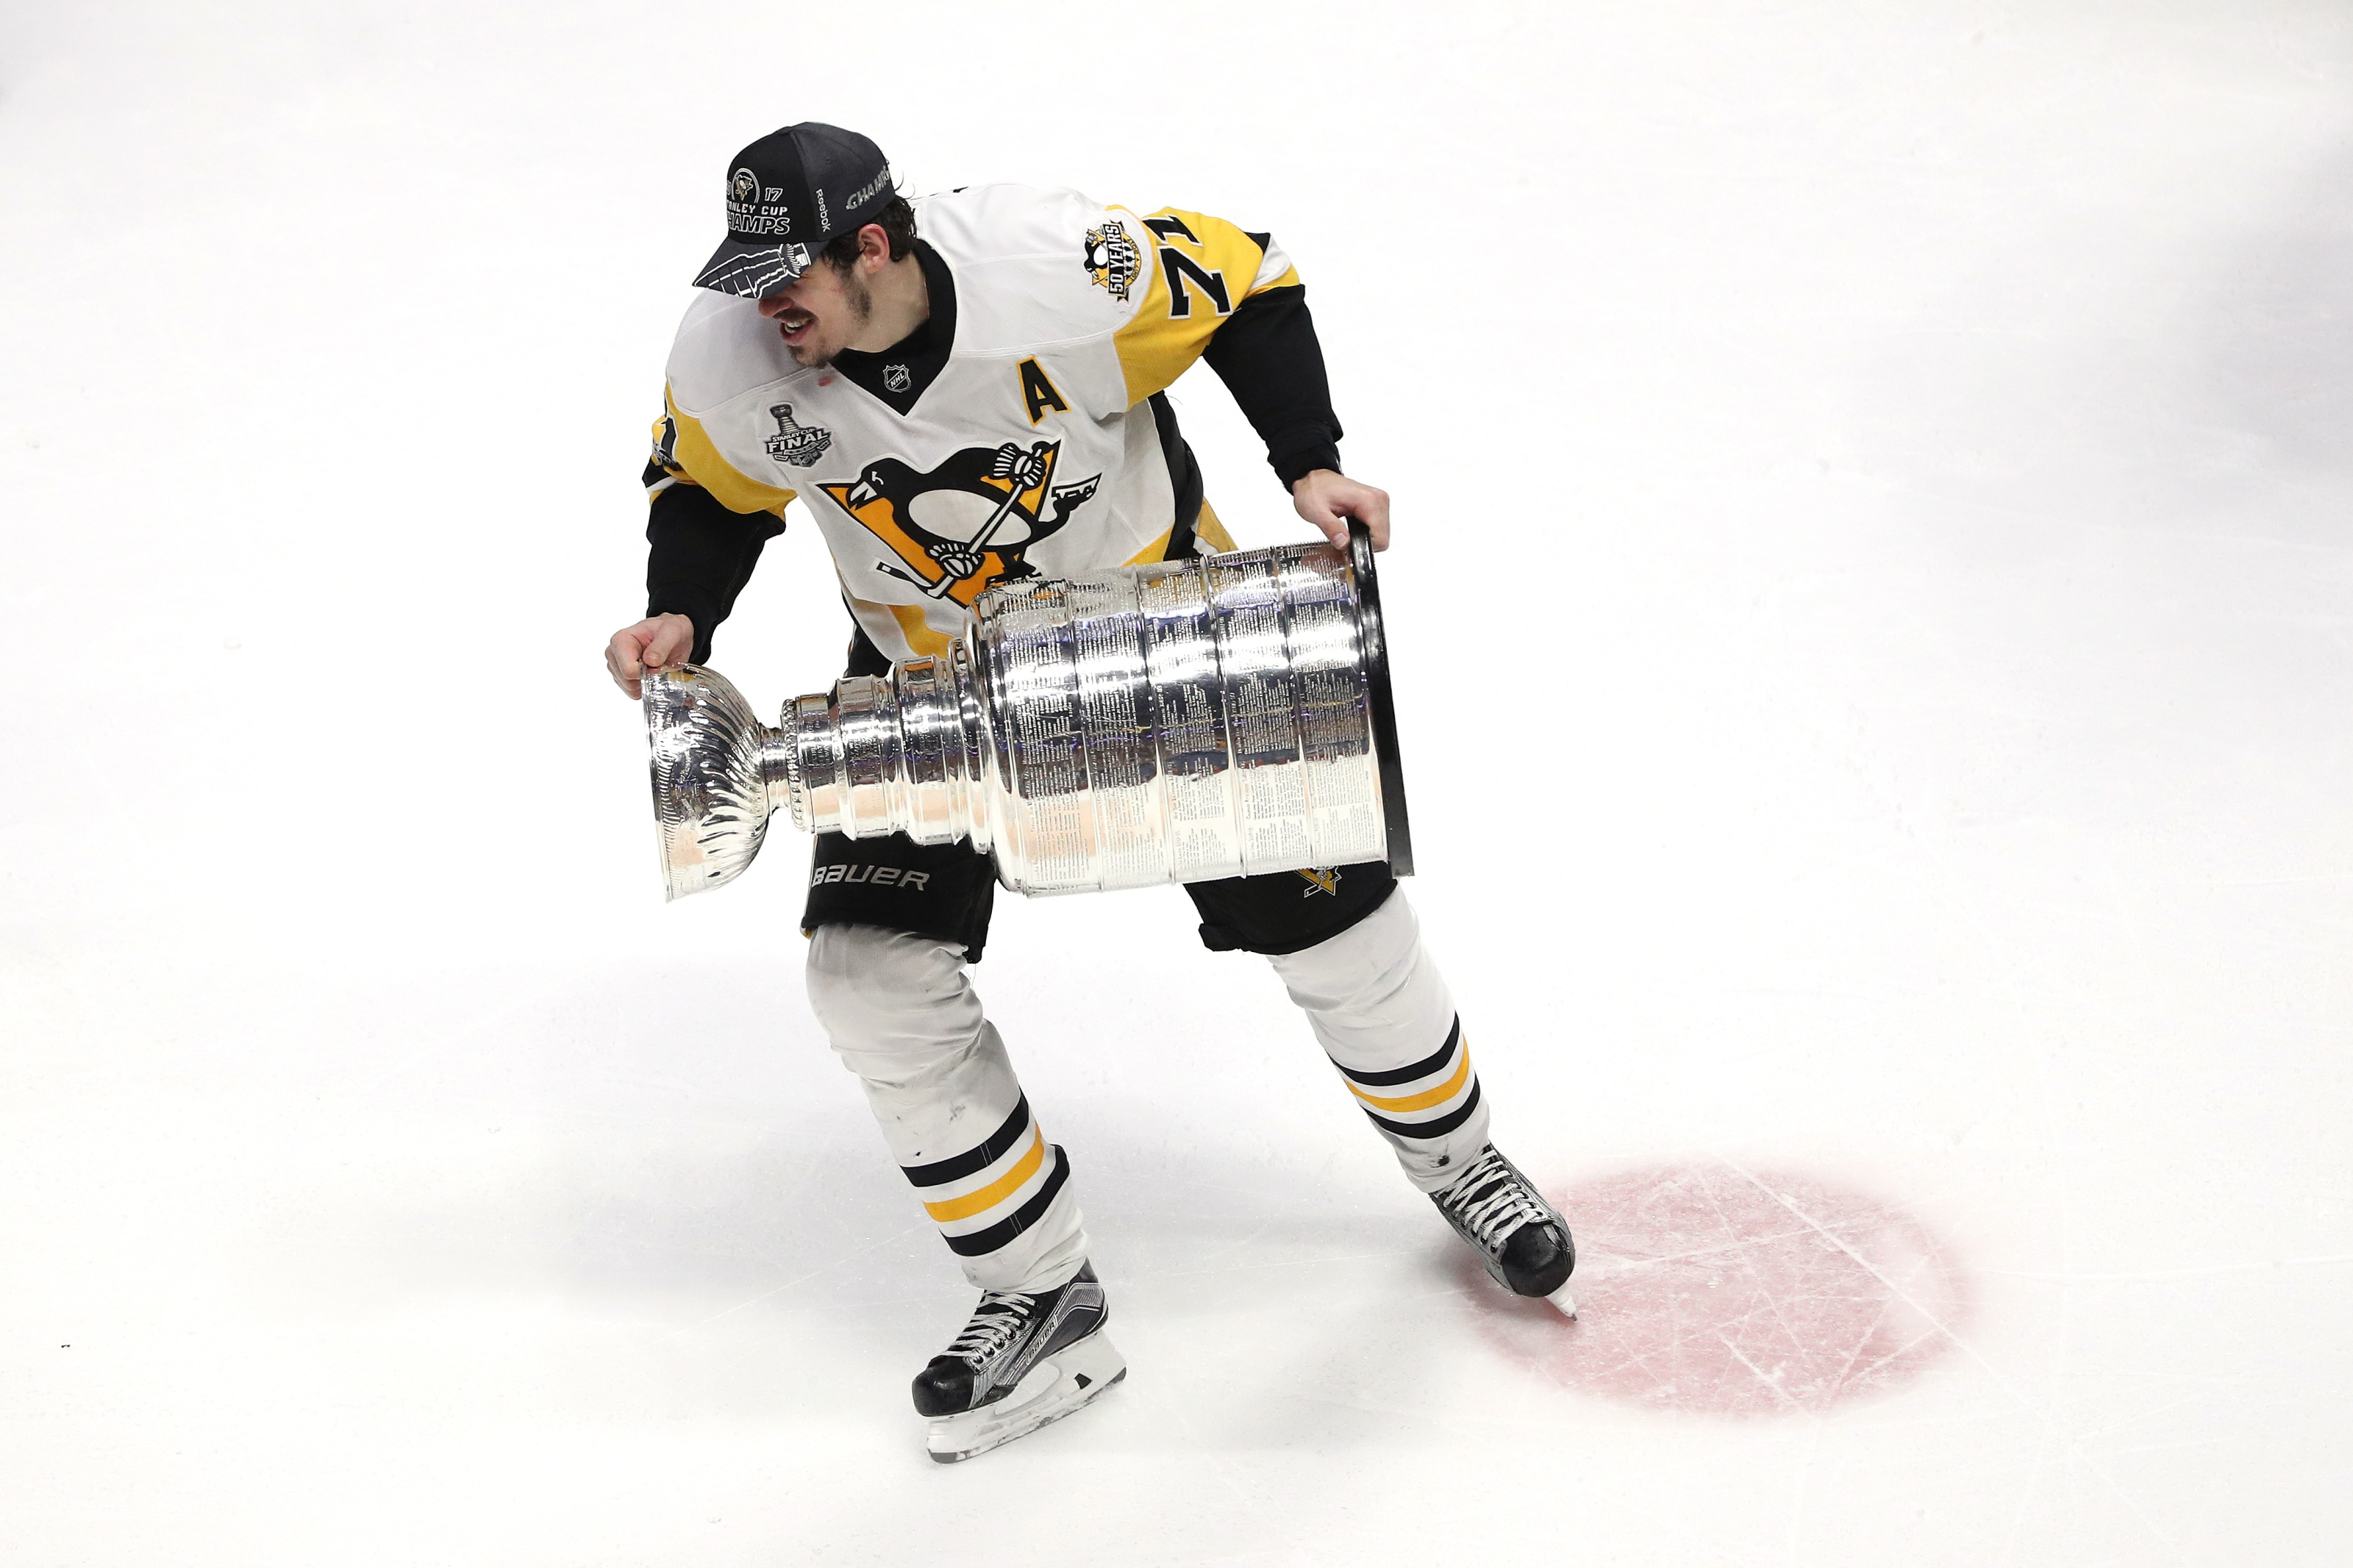 Evgeni Malkin drops the gloves while the Penguins drop the NHL's